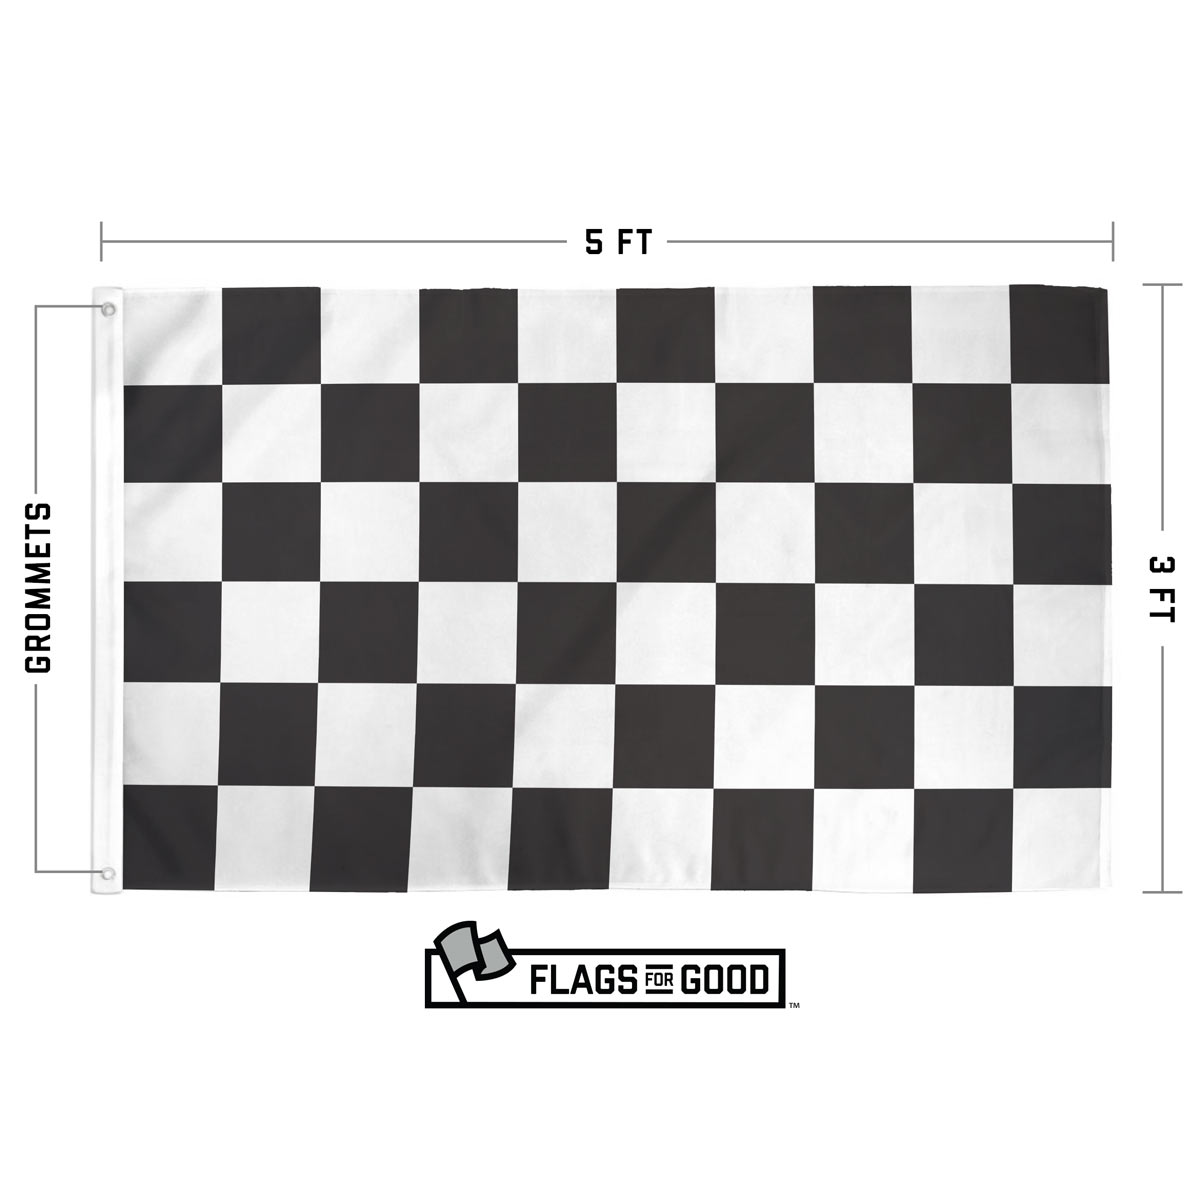 Checkered racing flag measuring 3 by 5 feet